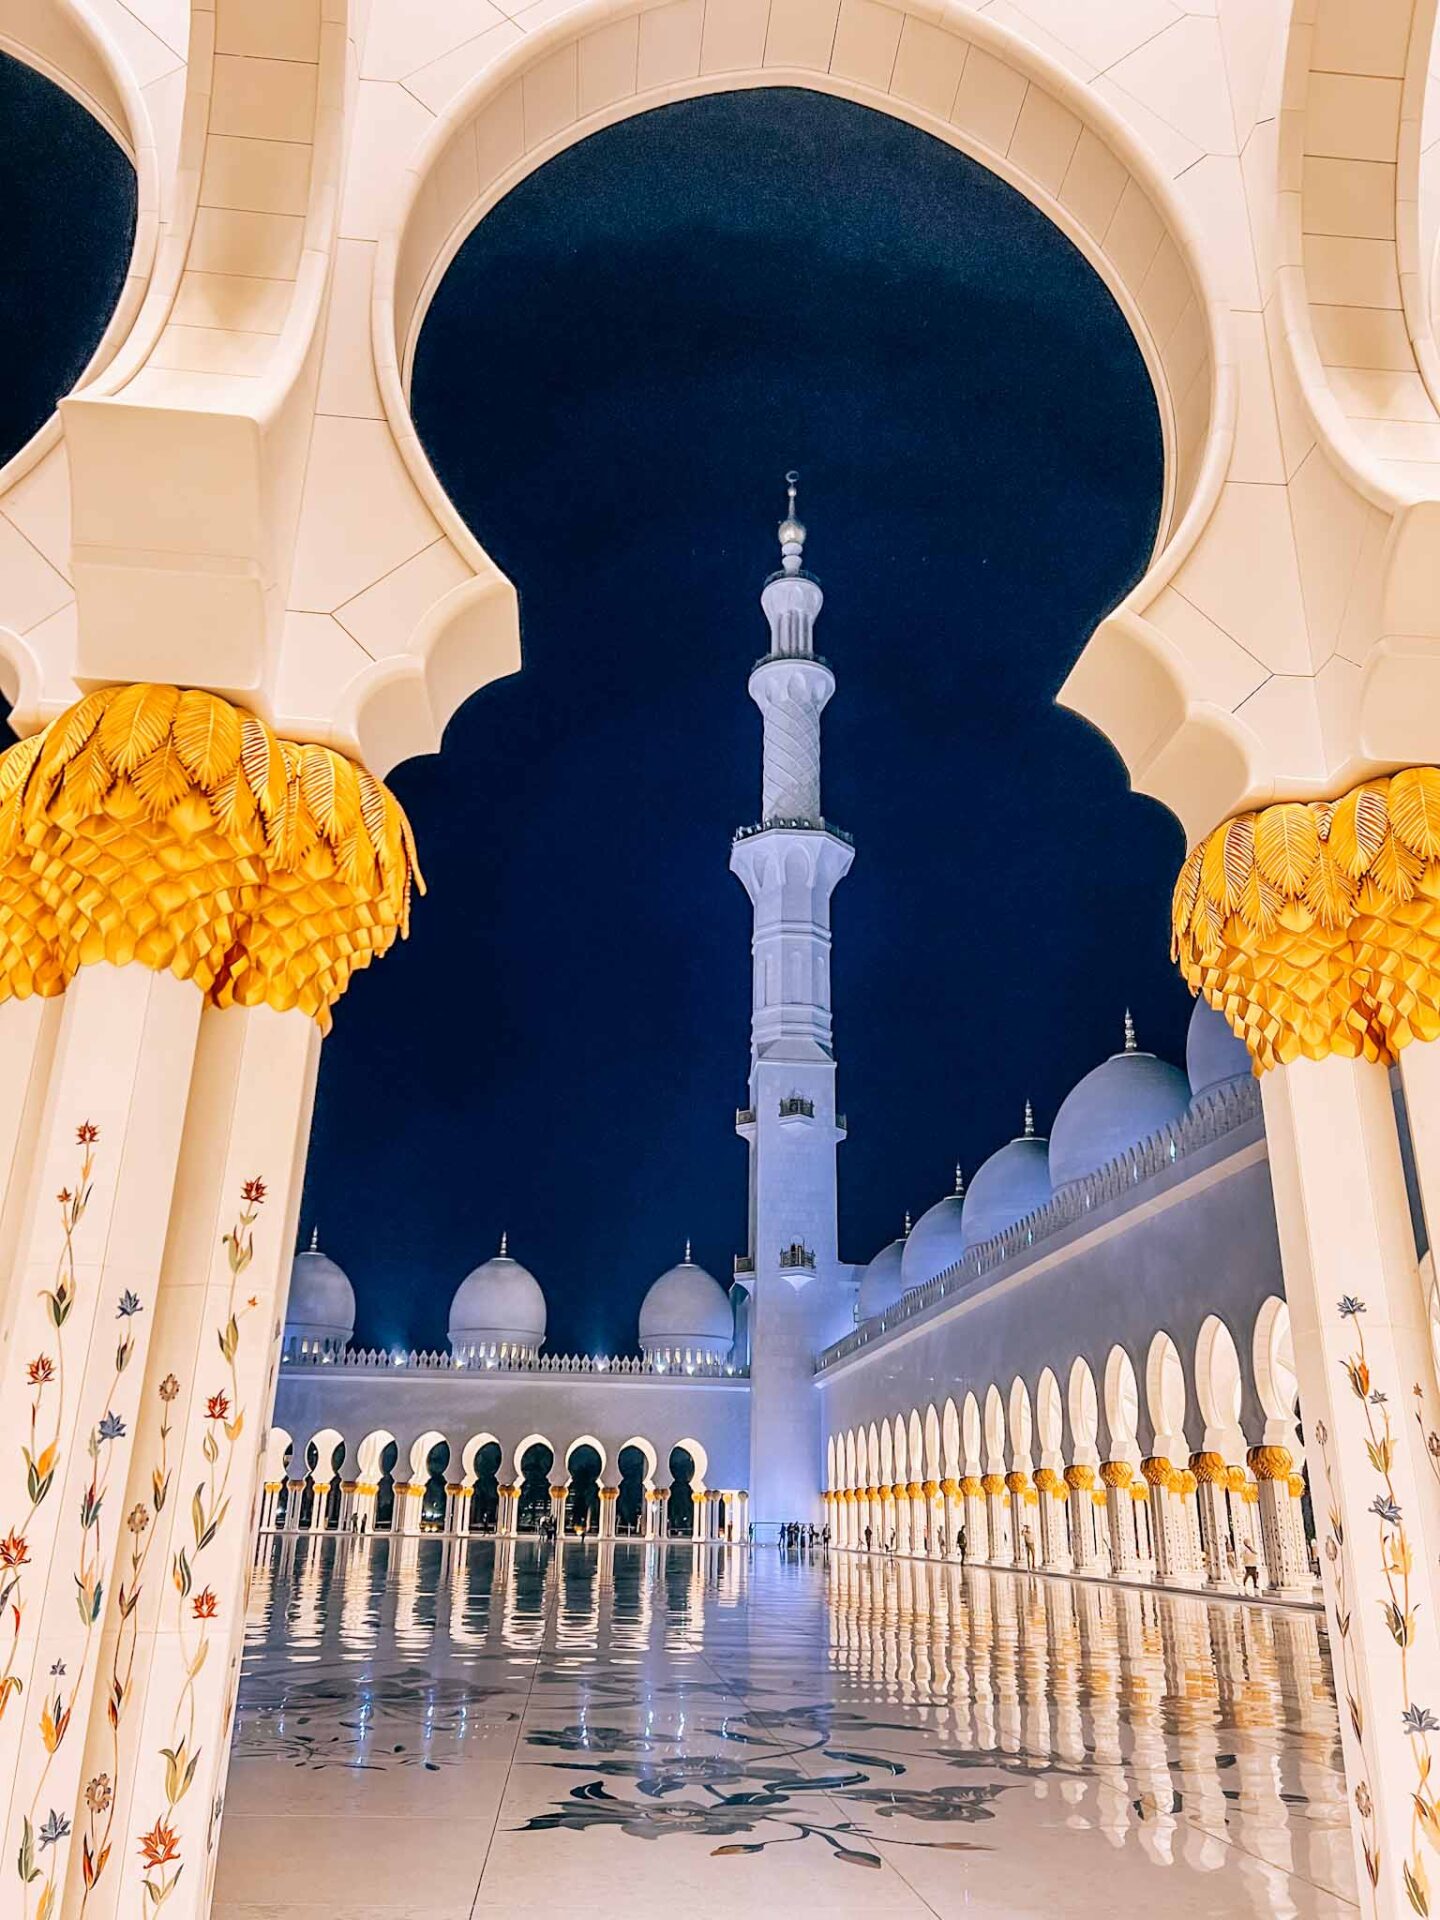 Places to visit in Abu Dhabi, Sheikh Zayed Mosque Arch at night